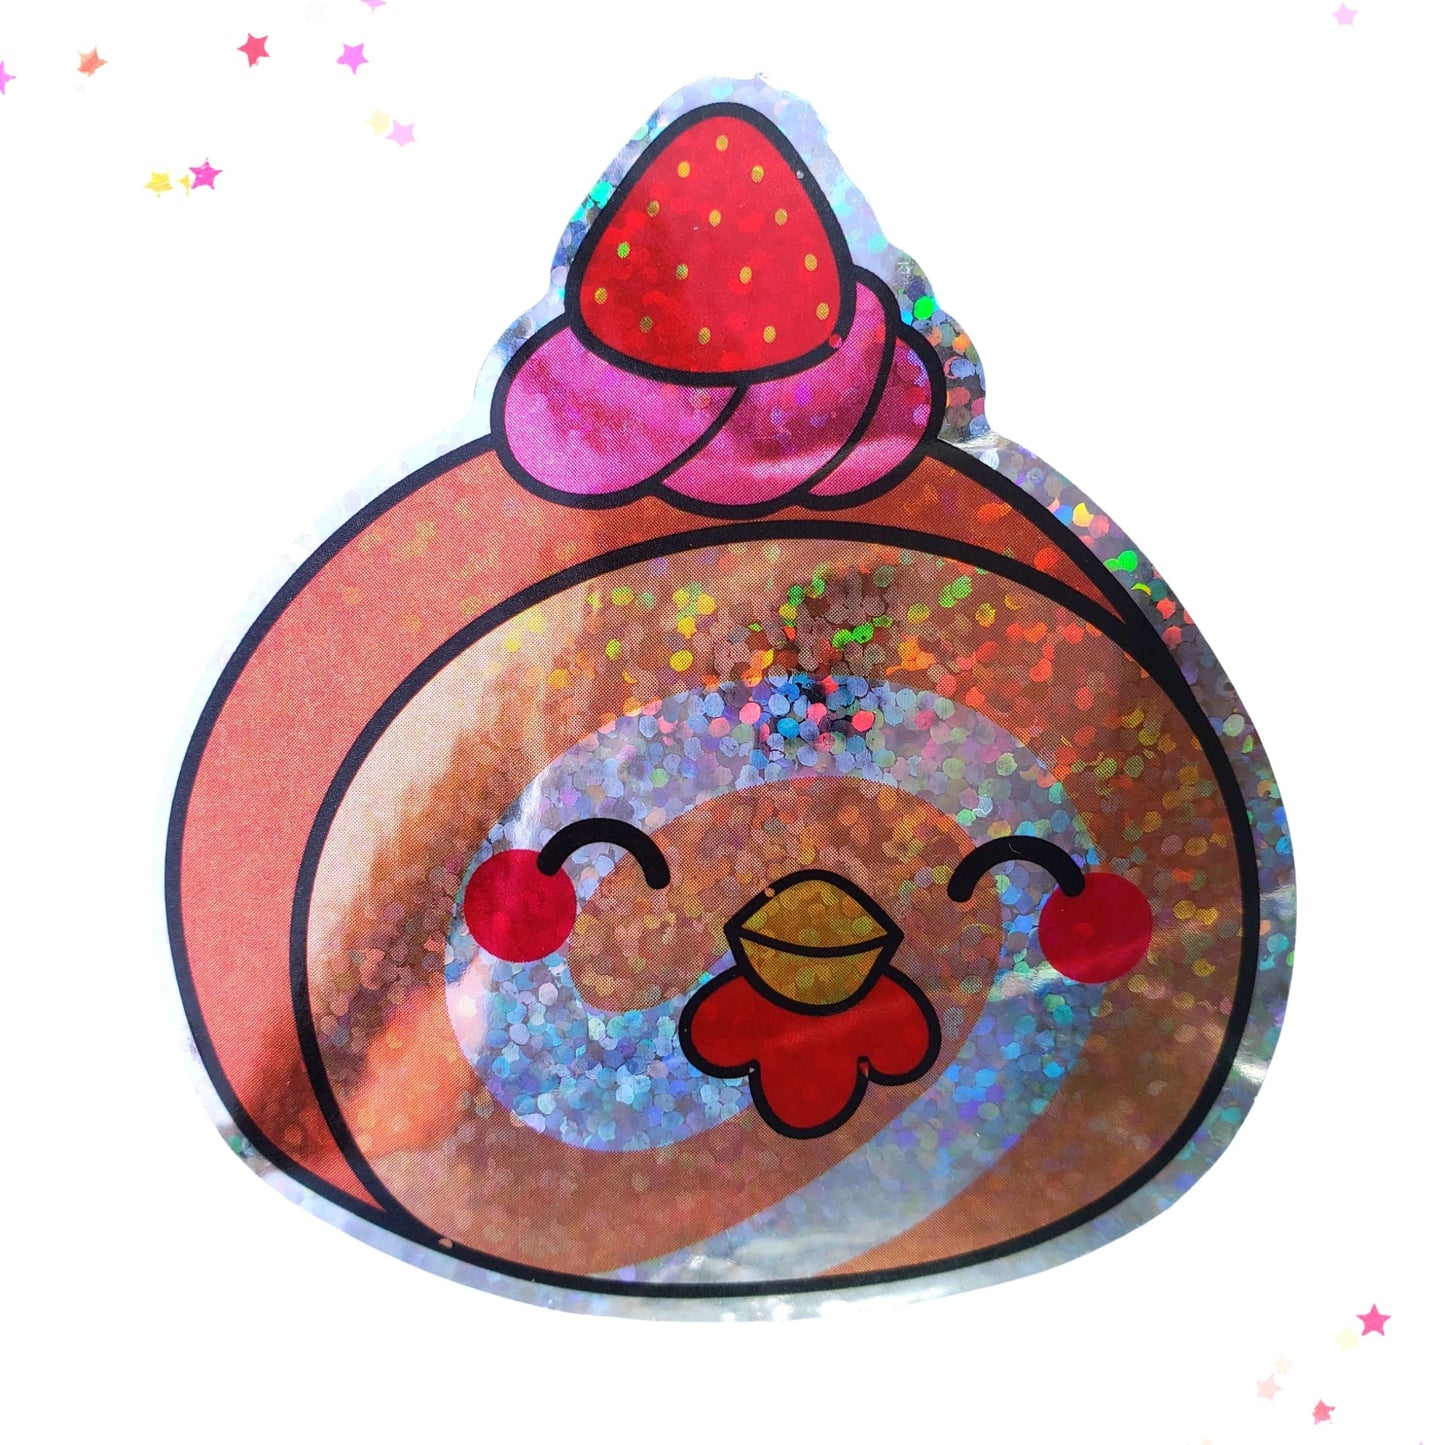 Premium Sticker - Sparkly Holographic Glitter Cluckin' Good Roll Cake from Confetti Kitty, Only 2.00